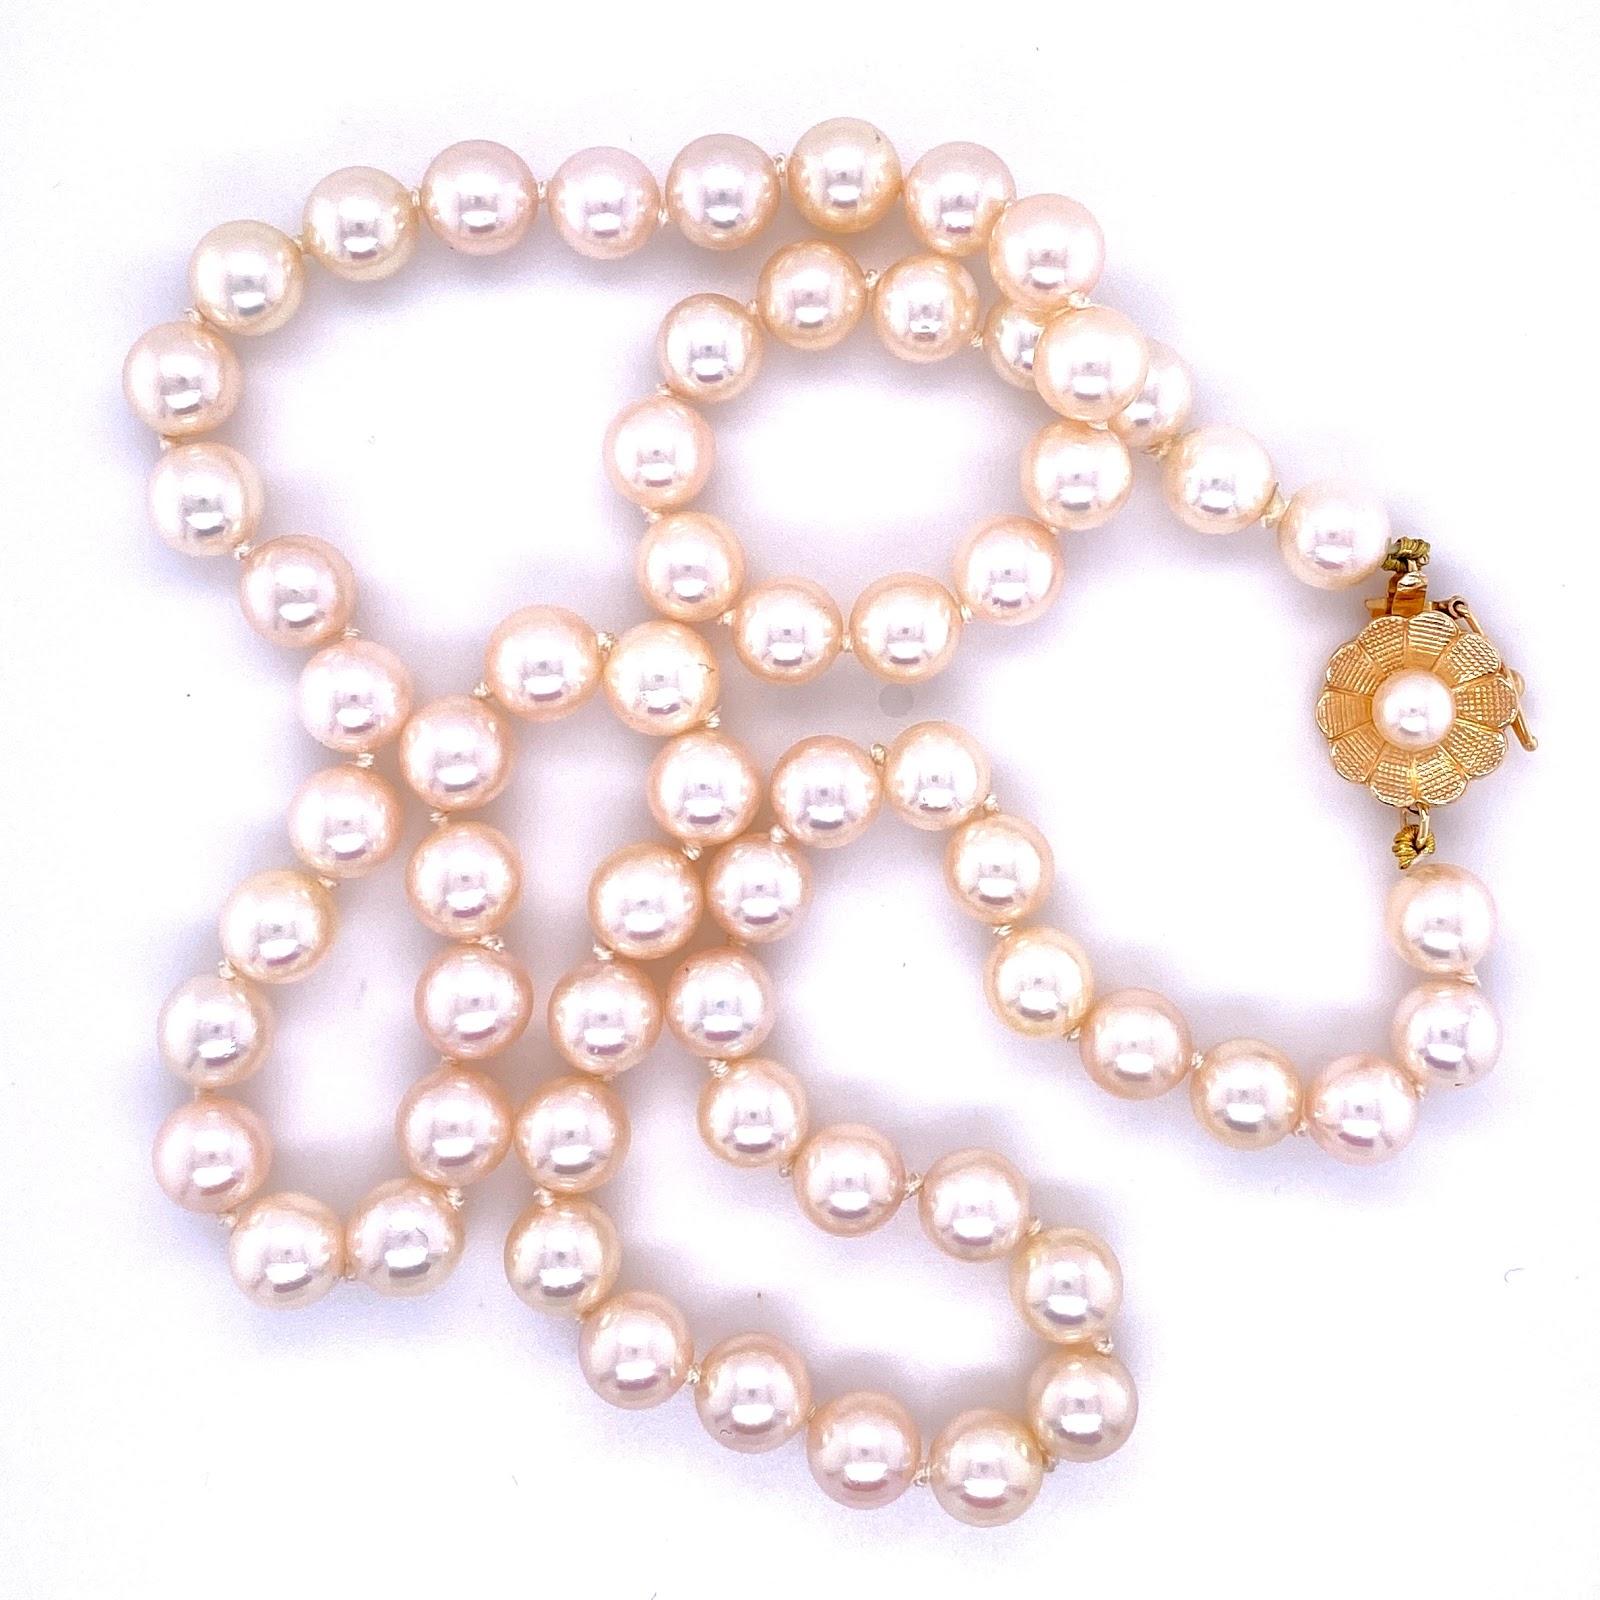 14 karat yellow gold floral clasp with florentine finish with a 11 mm diameter box clasp with figure 8 safety. The pears are 6 - 6.5 mm cultured akoya pearls strung with knots to 18’’. The strand contains 63 pearls plus one in the clasp. 